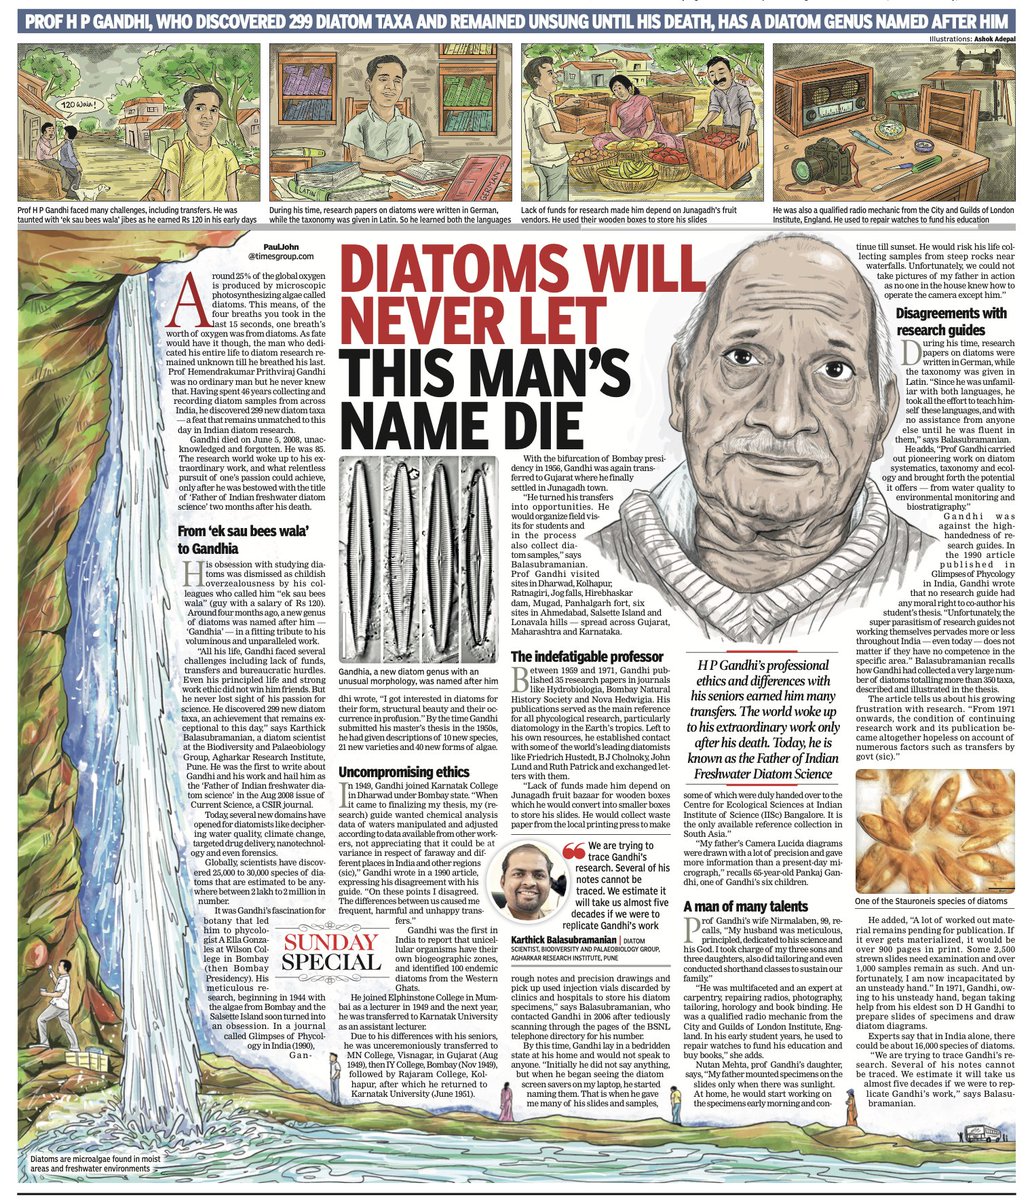 This fascinating scientific article in 'The Times of India' highlights the remarkable contributions of an unsung scientist Prof. Hemendrakumar P Gandhi to Indian diatom research. A must-read for anyone interested in scientific research! @IndiaDST  @timesofindia @pkdhakephalkar